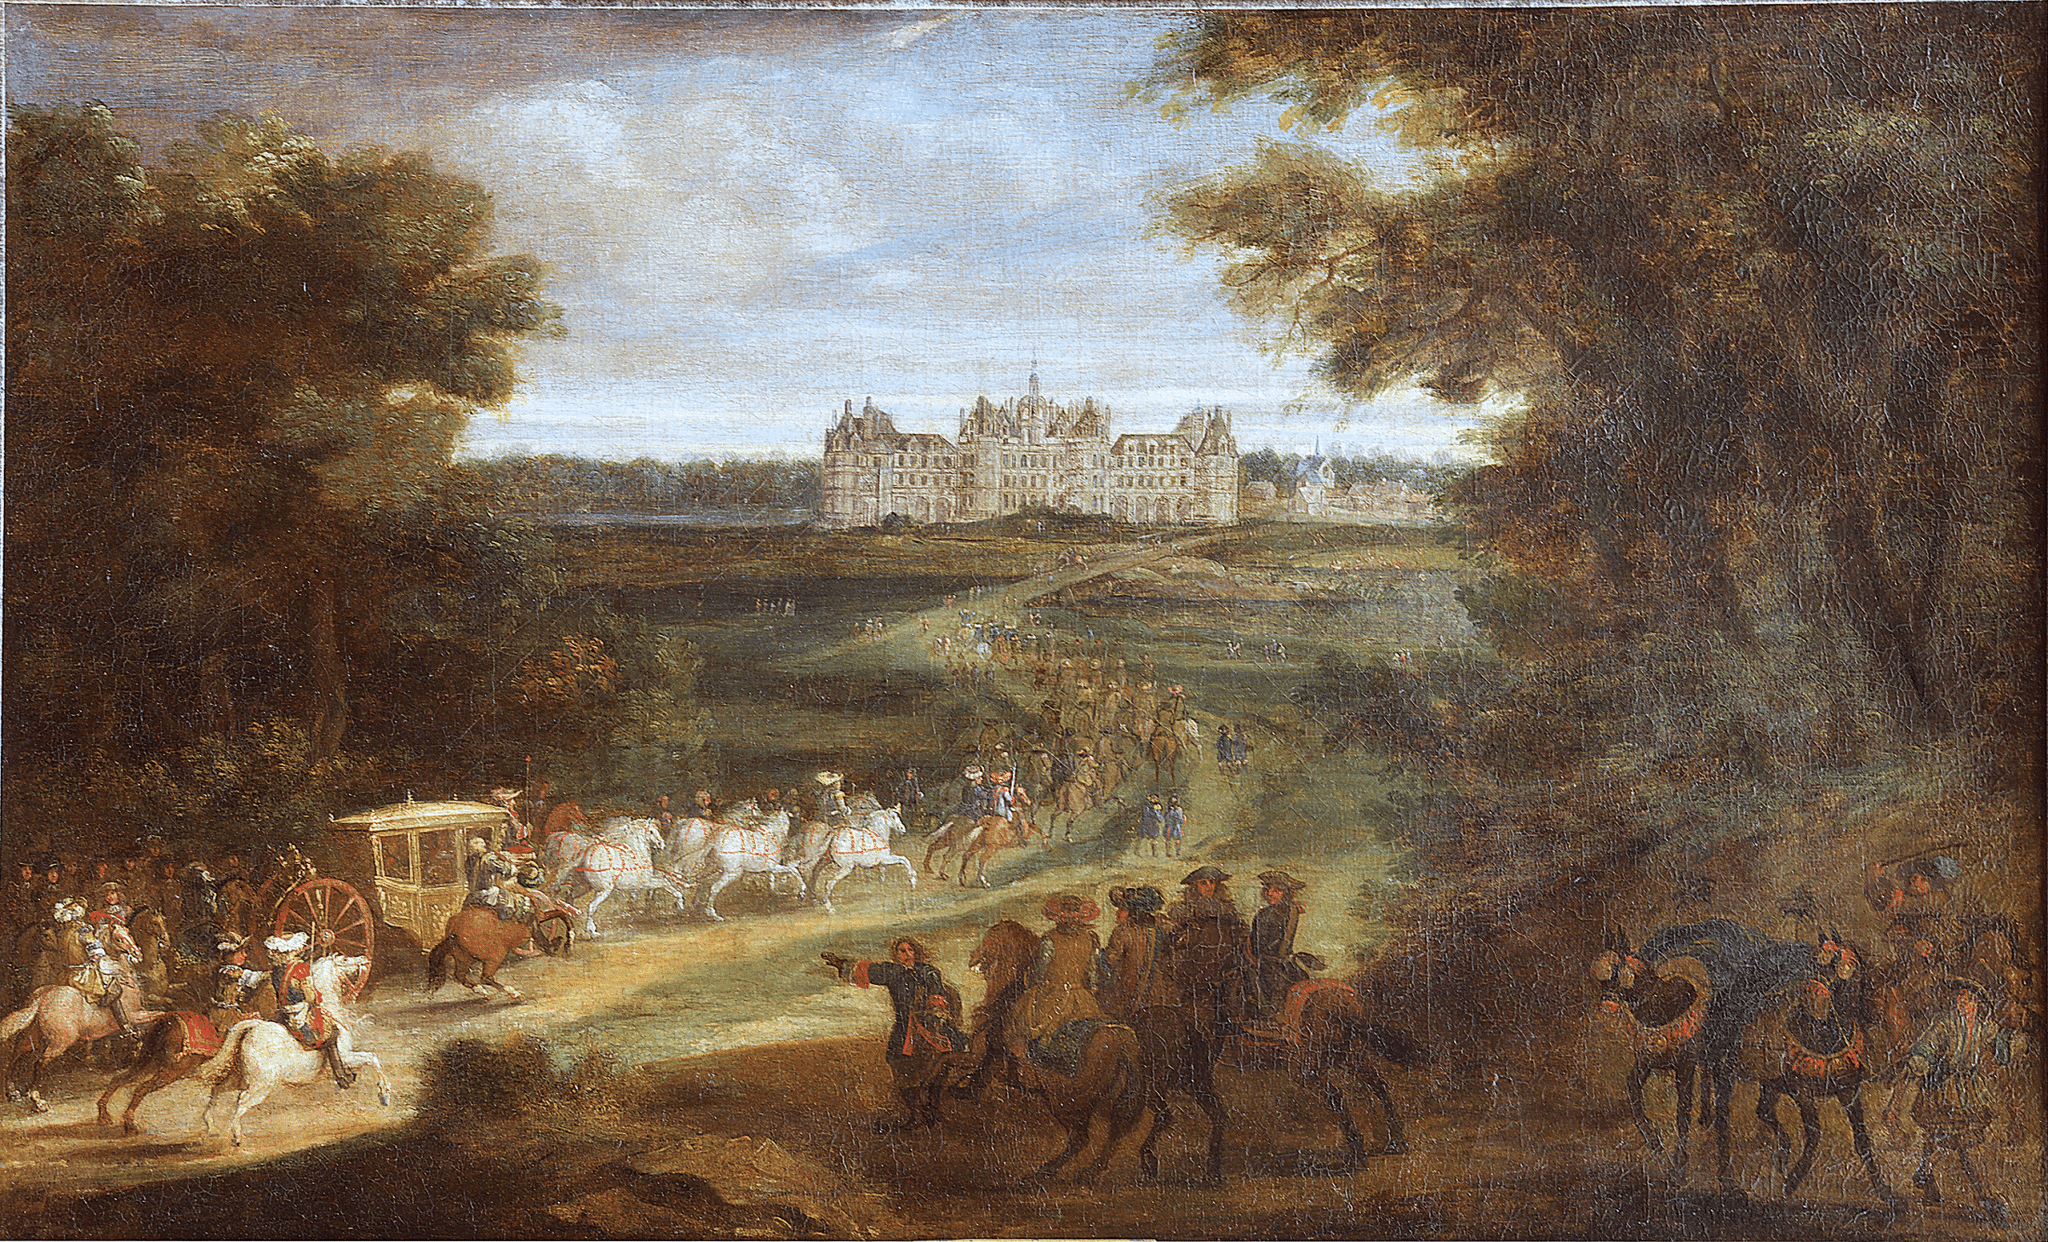 Arrival of Louis XIV to Chambord